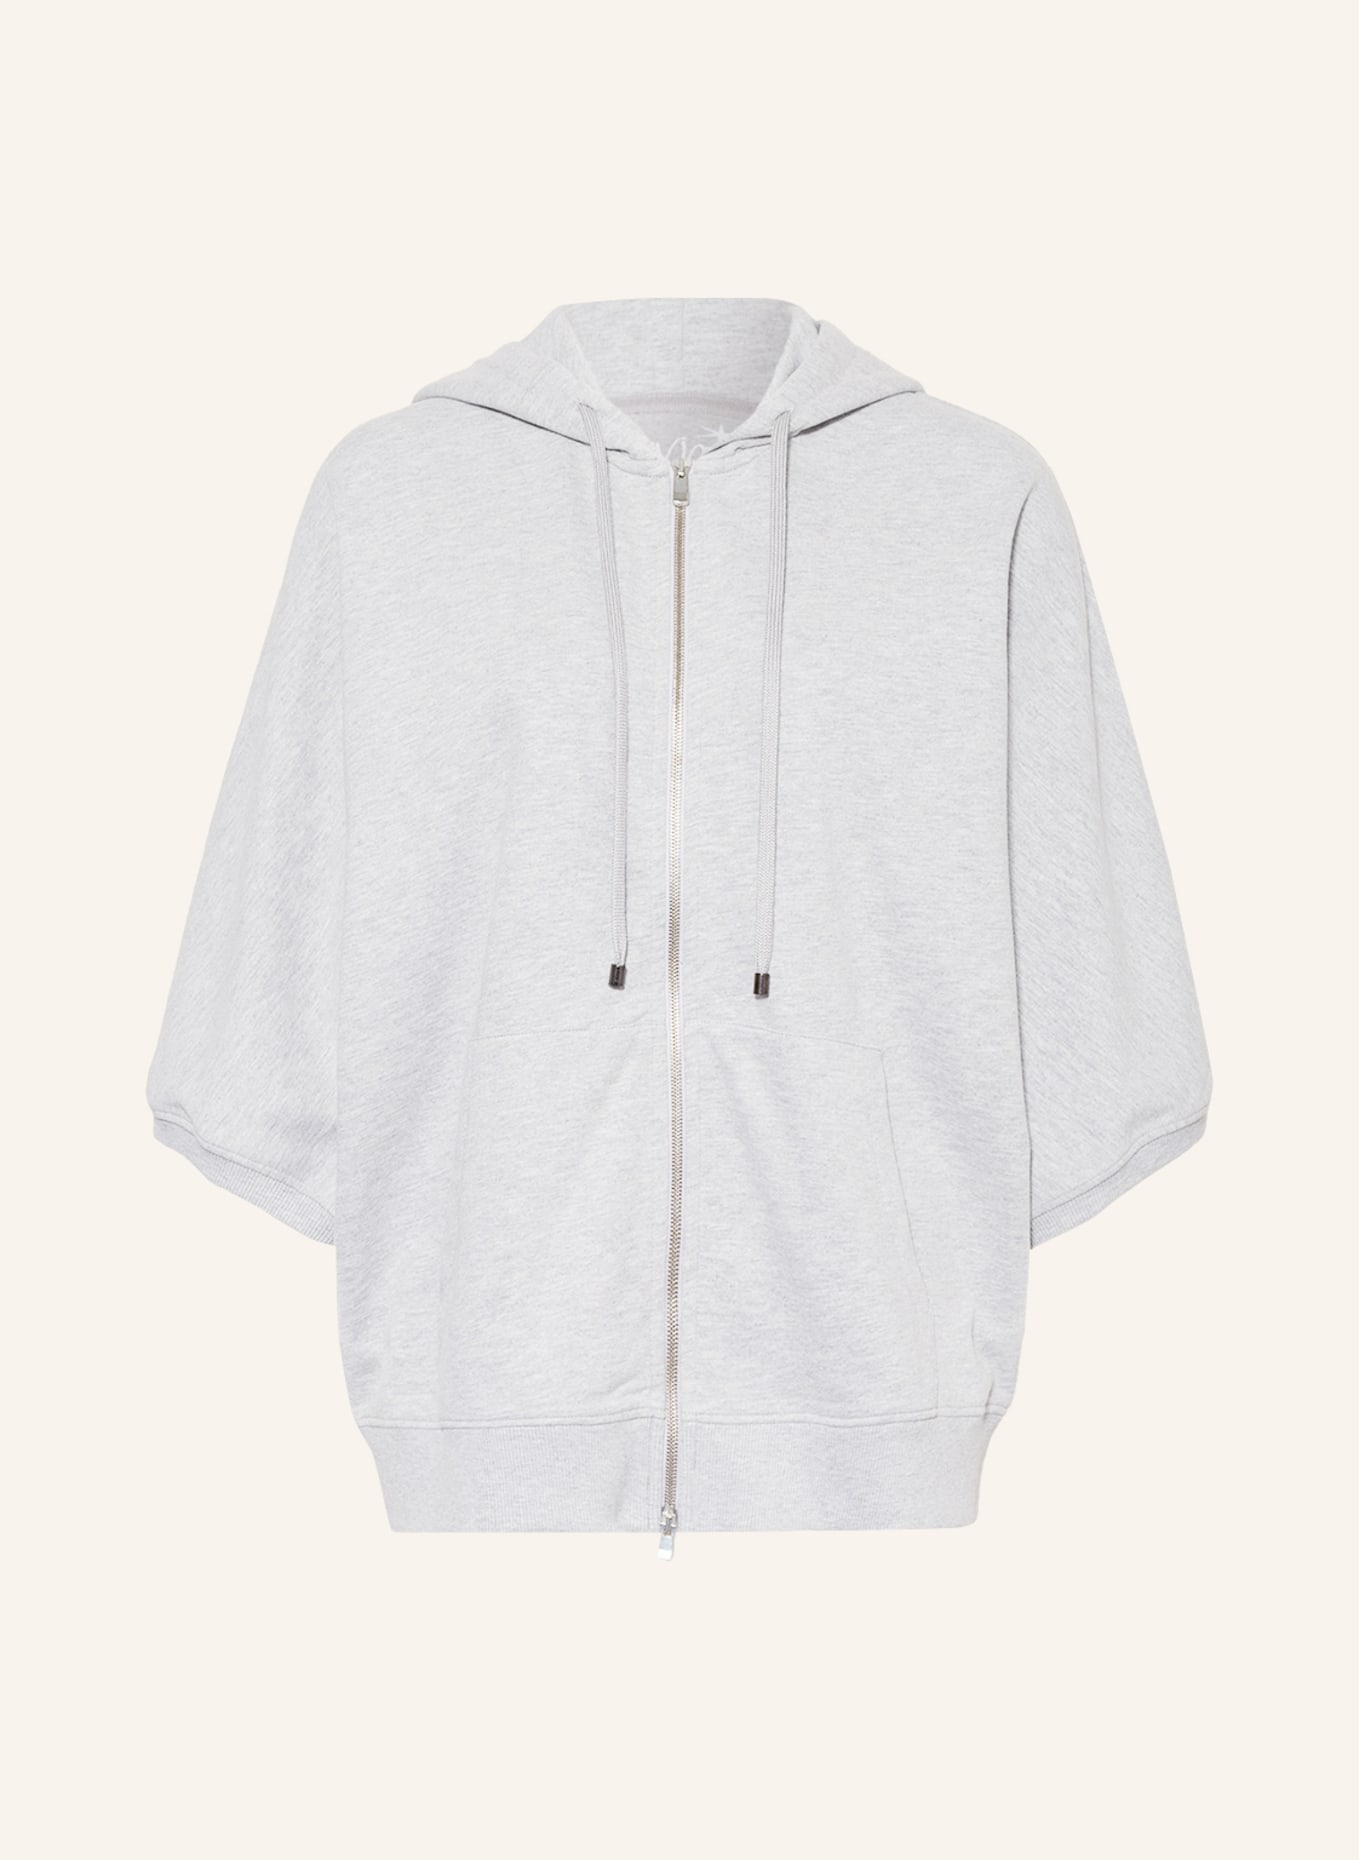 Juvia Sweat jacket with 3/4 sleeves, Color: LIGHT GRAY (Image 1)